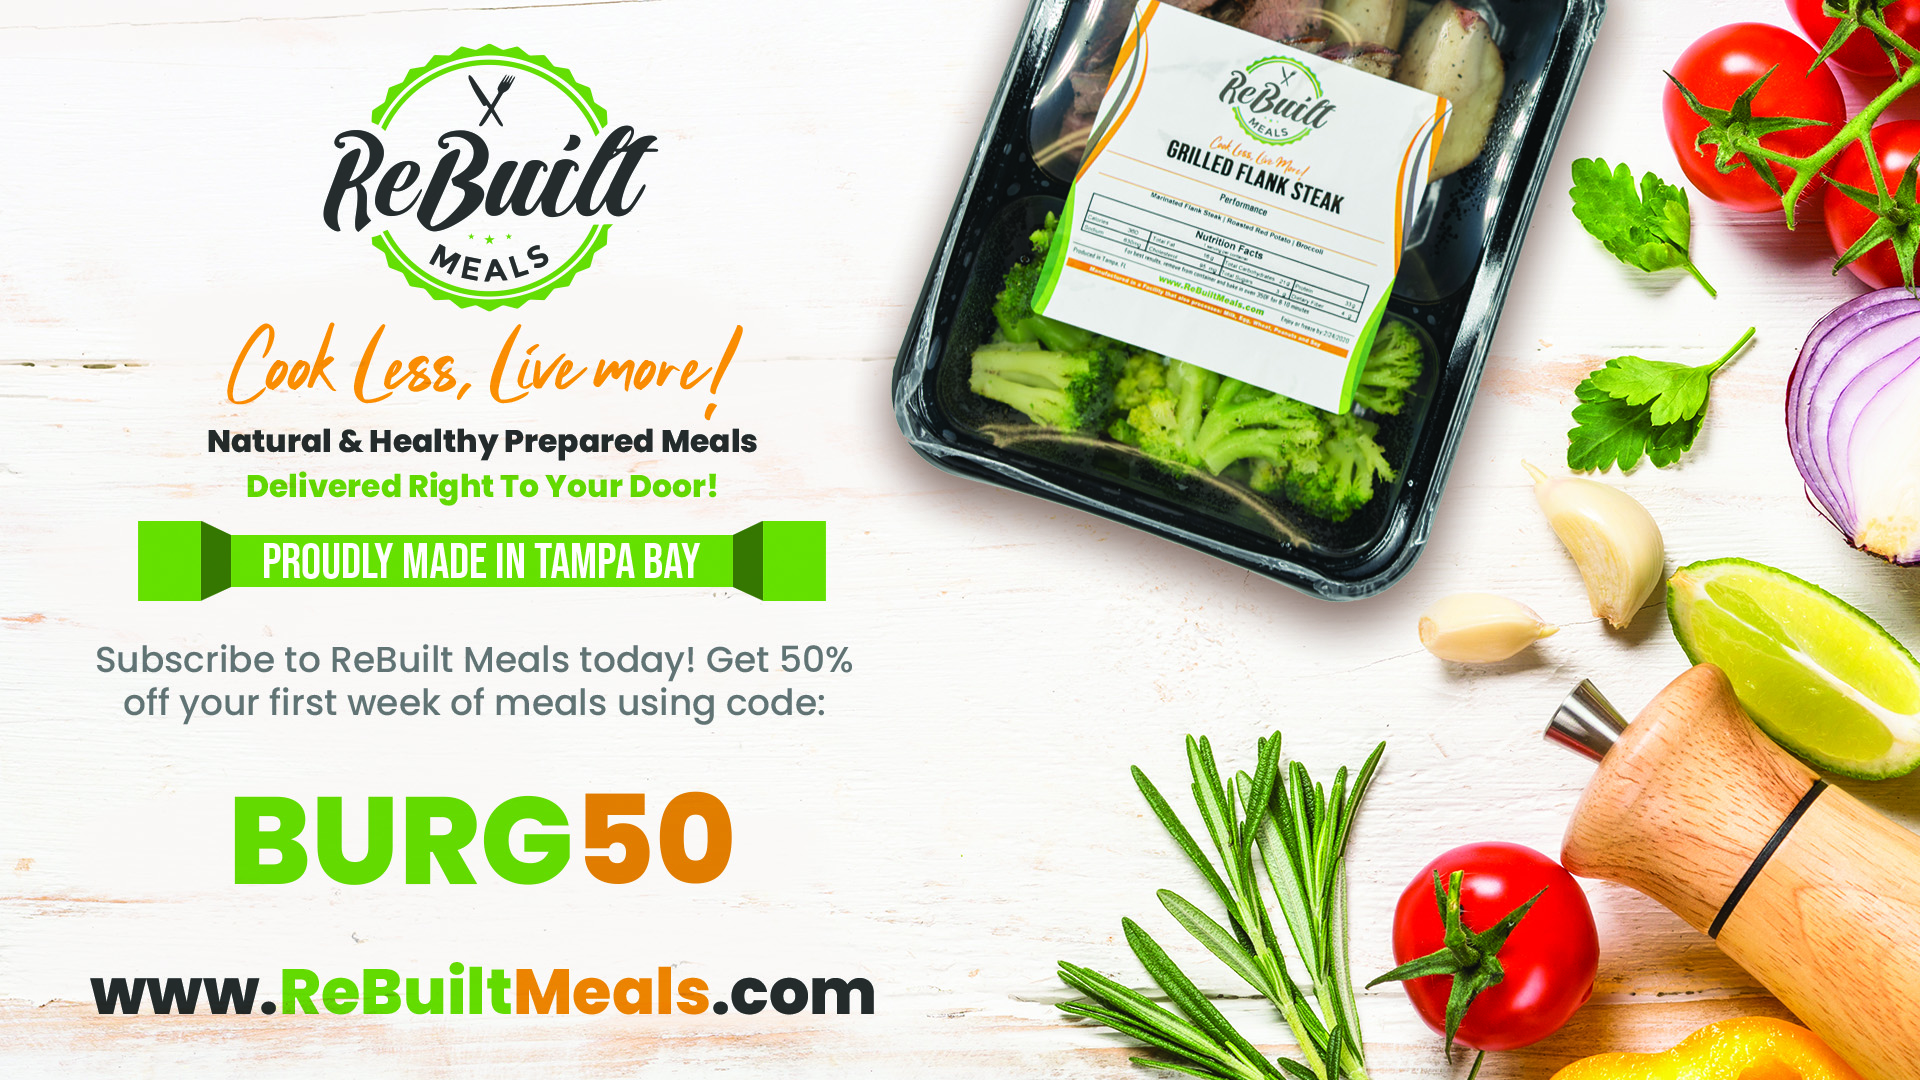 Image of healthy prepared meal for delivery with discount code Burg50